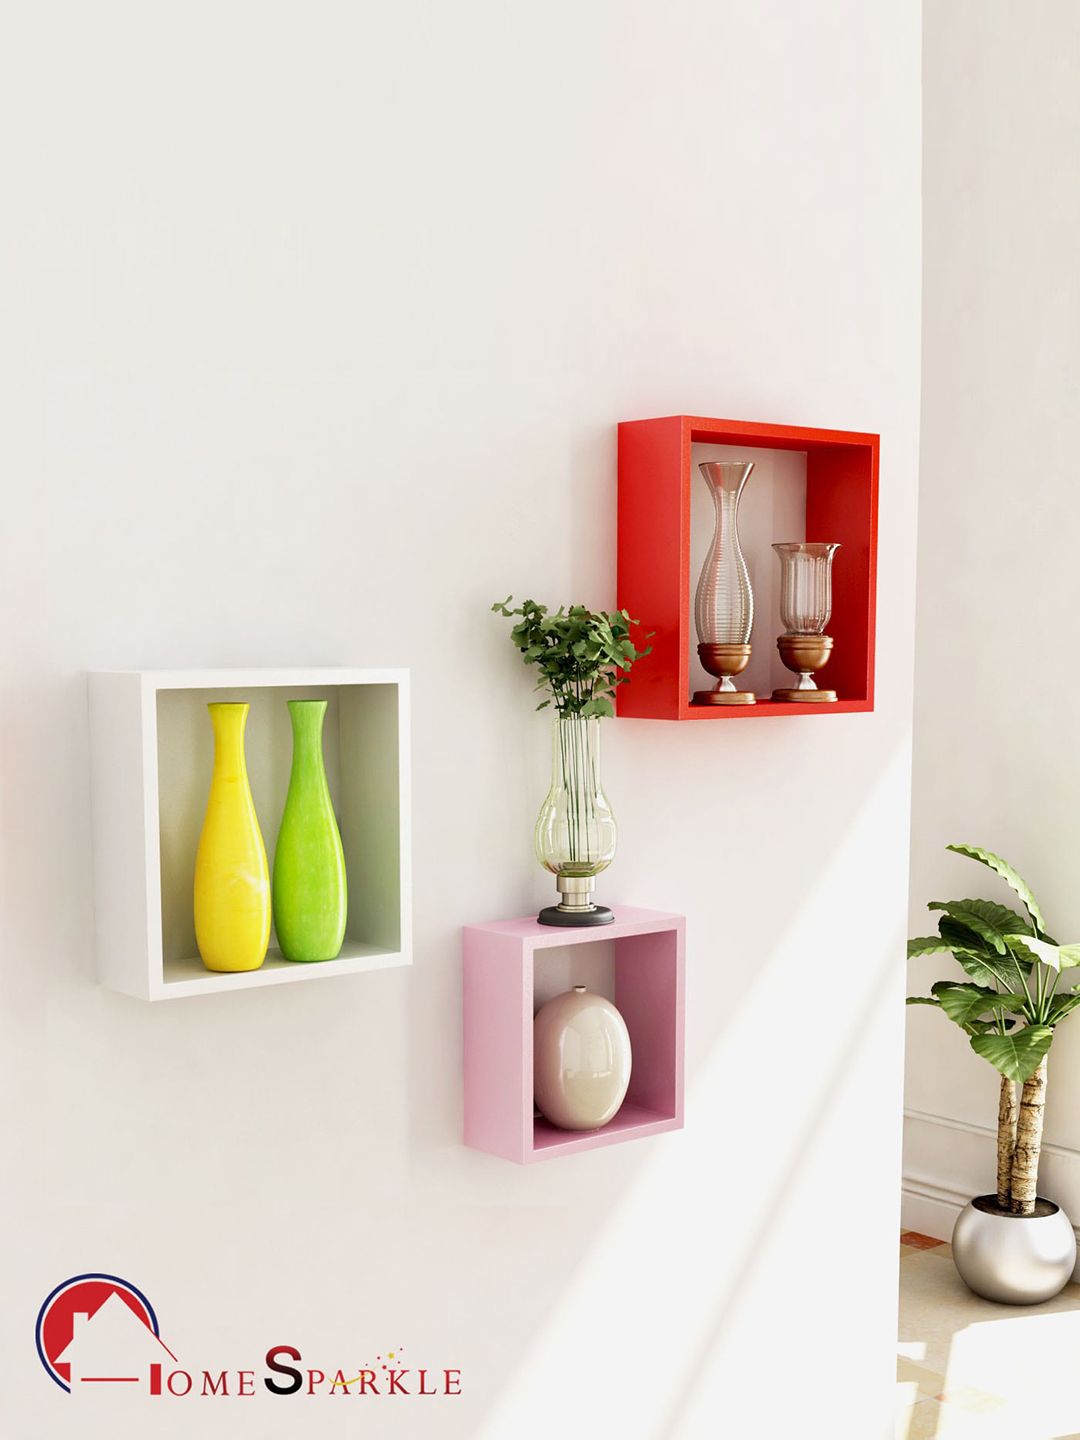 Home Sparkle Set of 3 Red & White MDF Wall Shelves Price in India